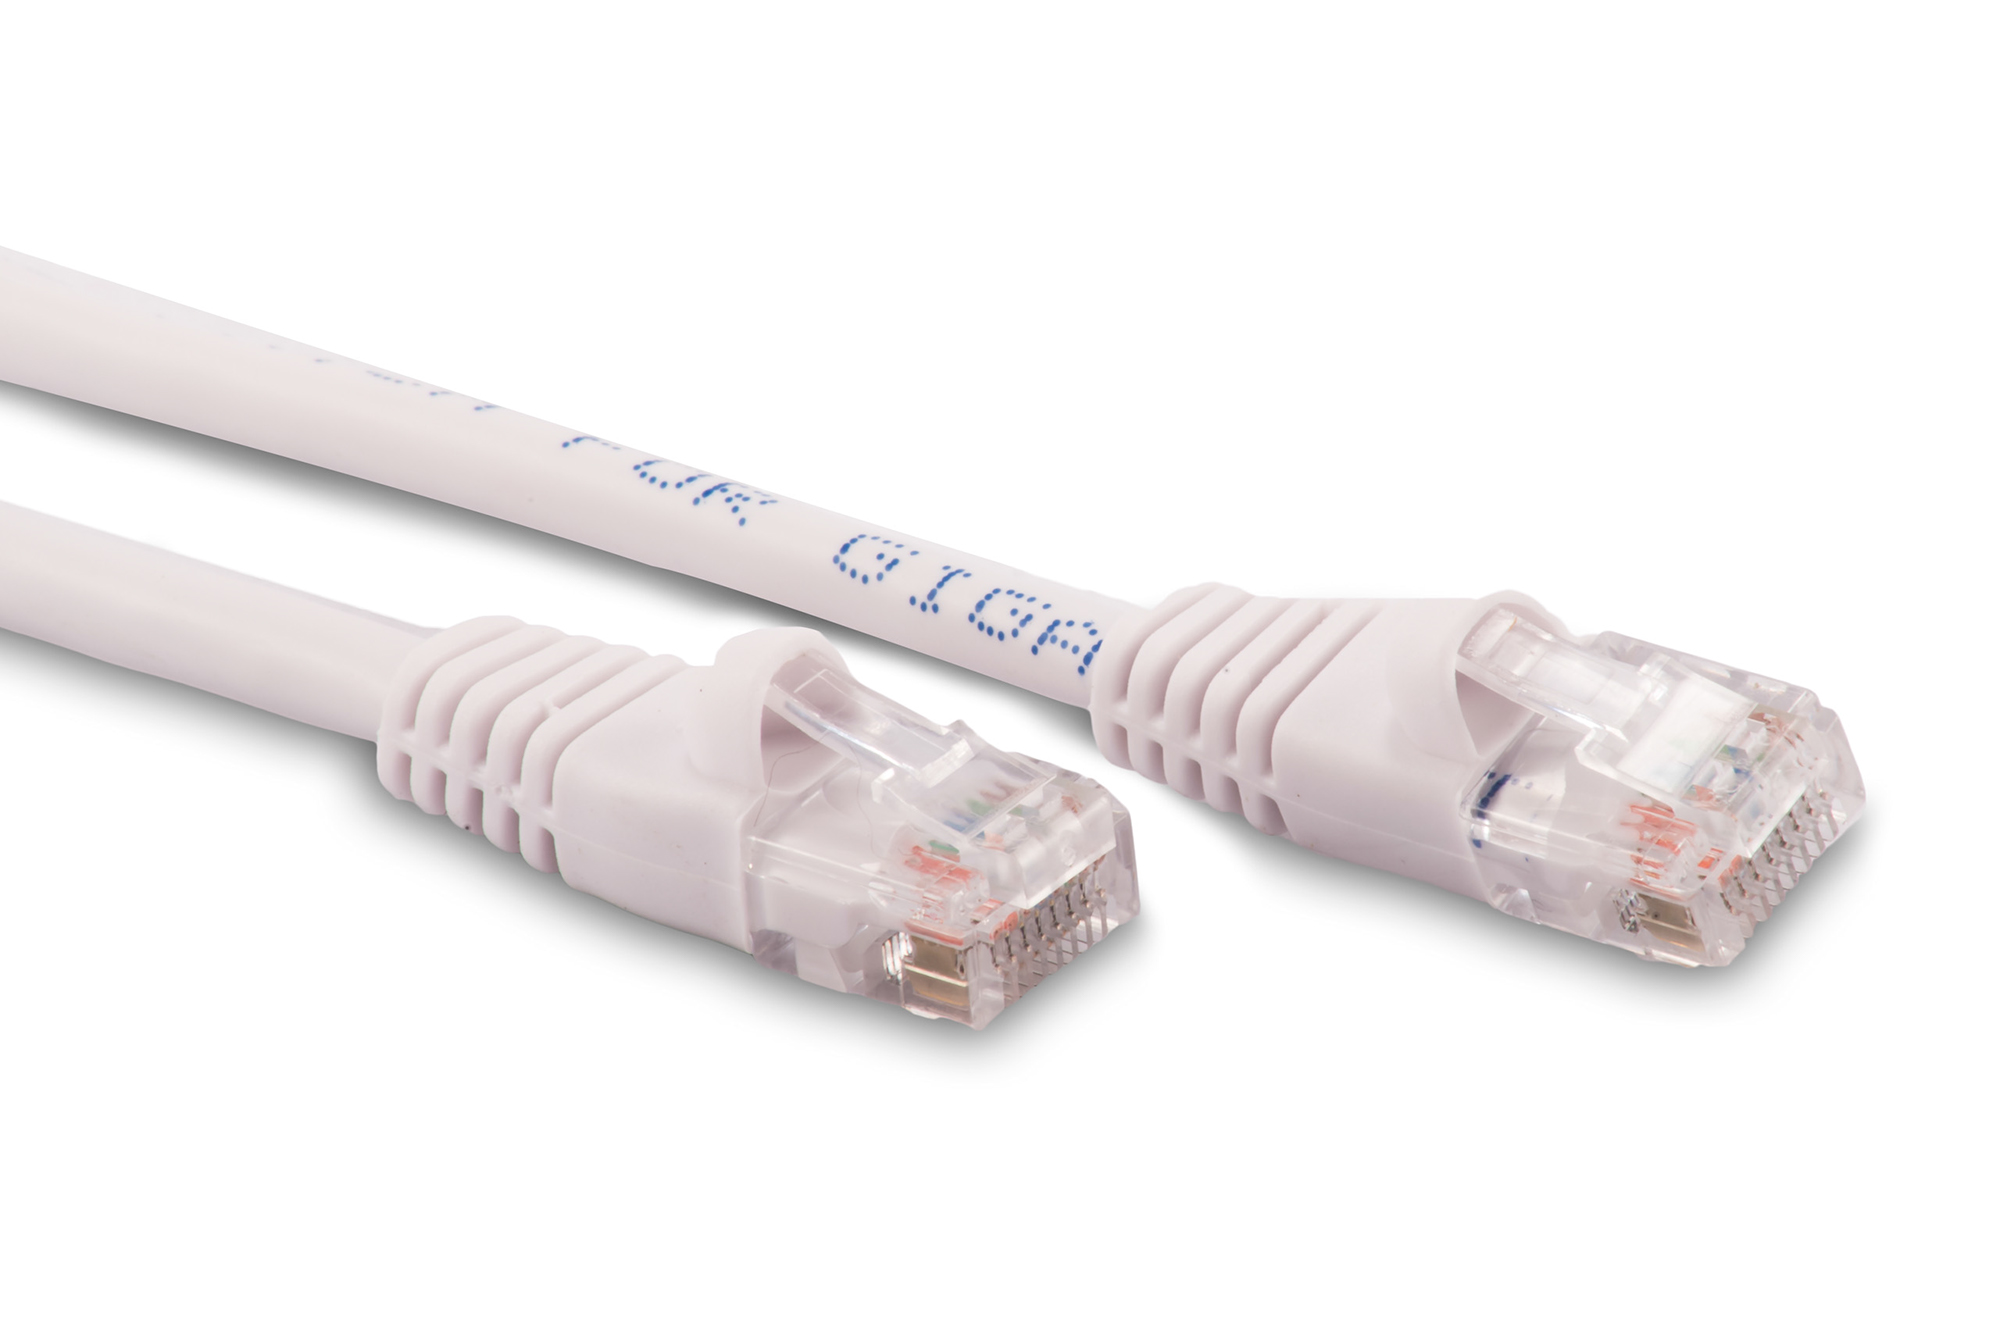 200ft Cat6 Ethernet Patch Cable - White Color - Snagless Boot